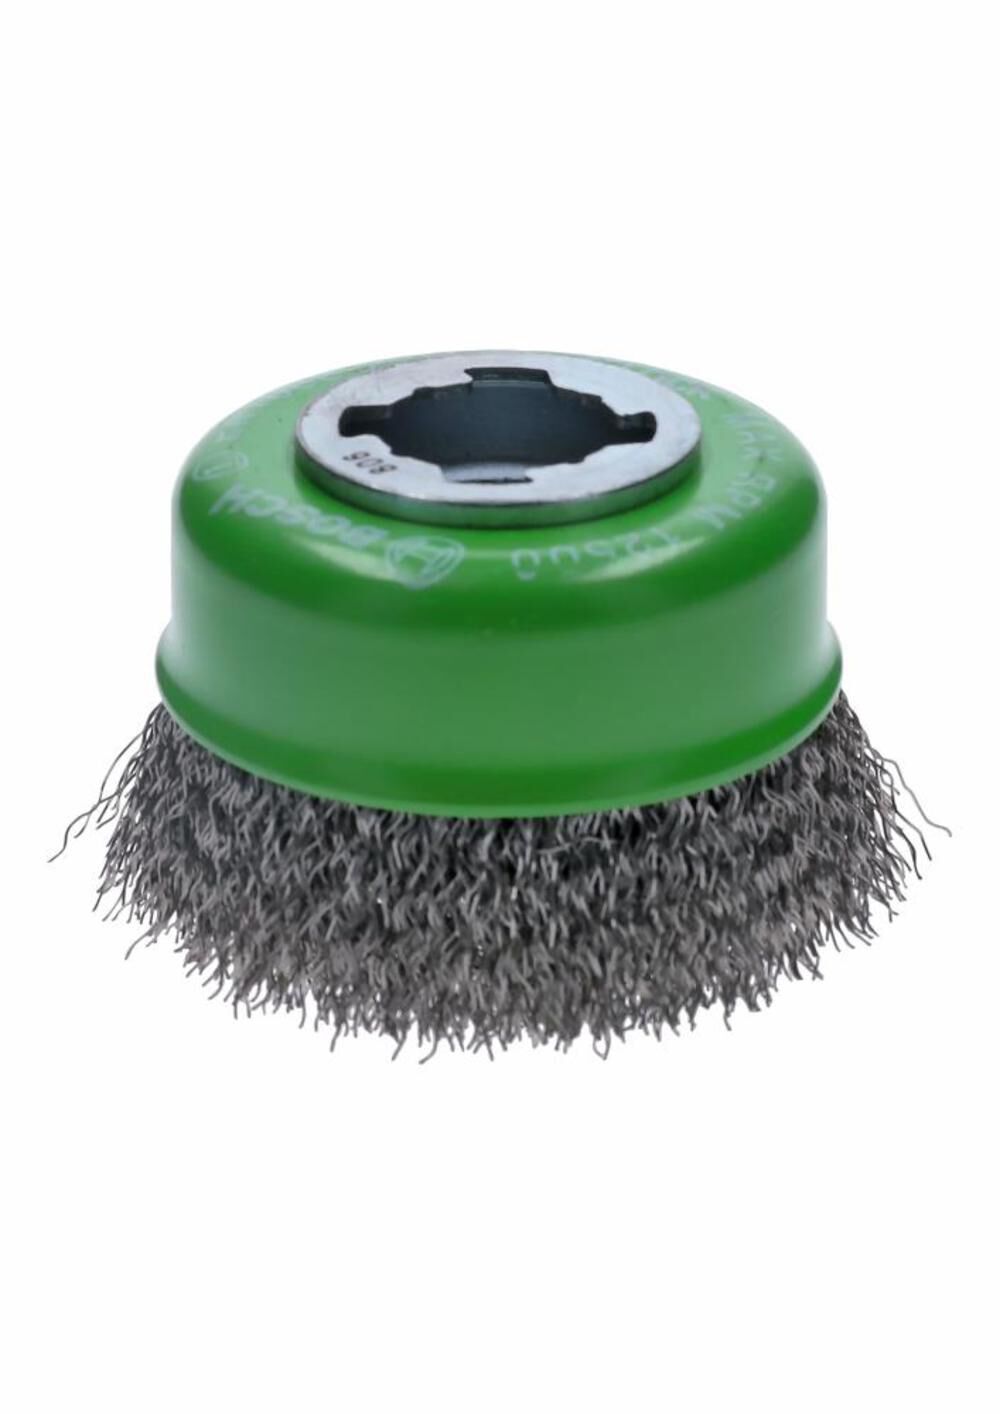 X-LOCK Arbor Crimped Stainless Steel Bosch WBX319 Cup Brush 3" Wheel 